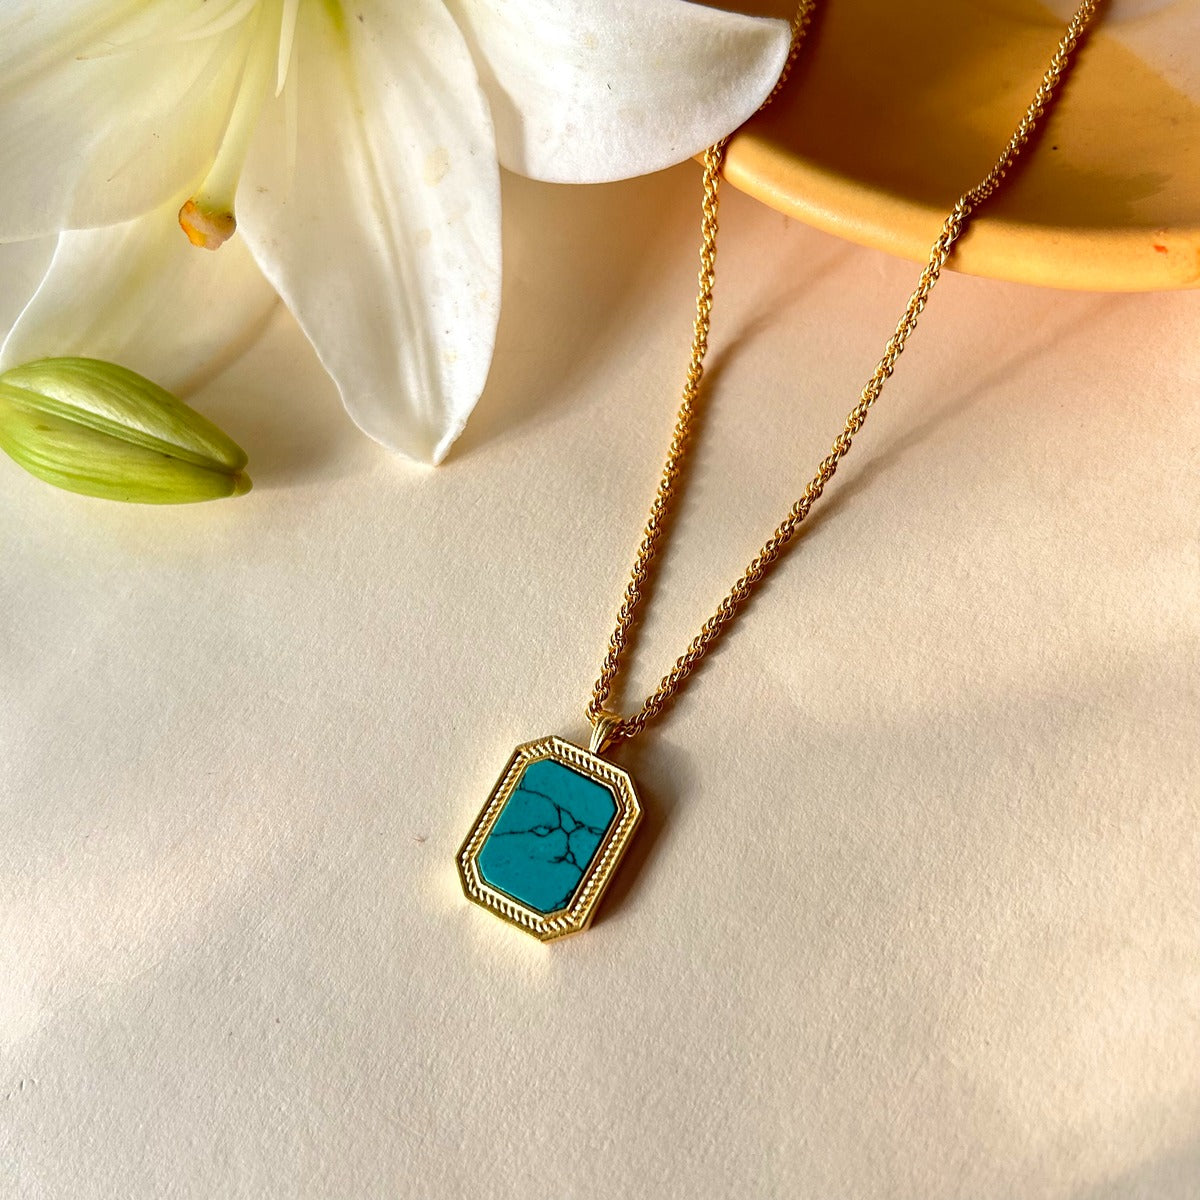 Soul Soothe Pendant Necklace with Turquoise - Relationships